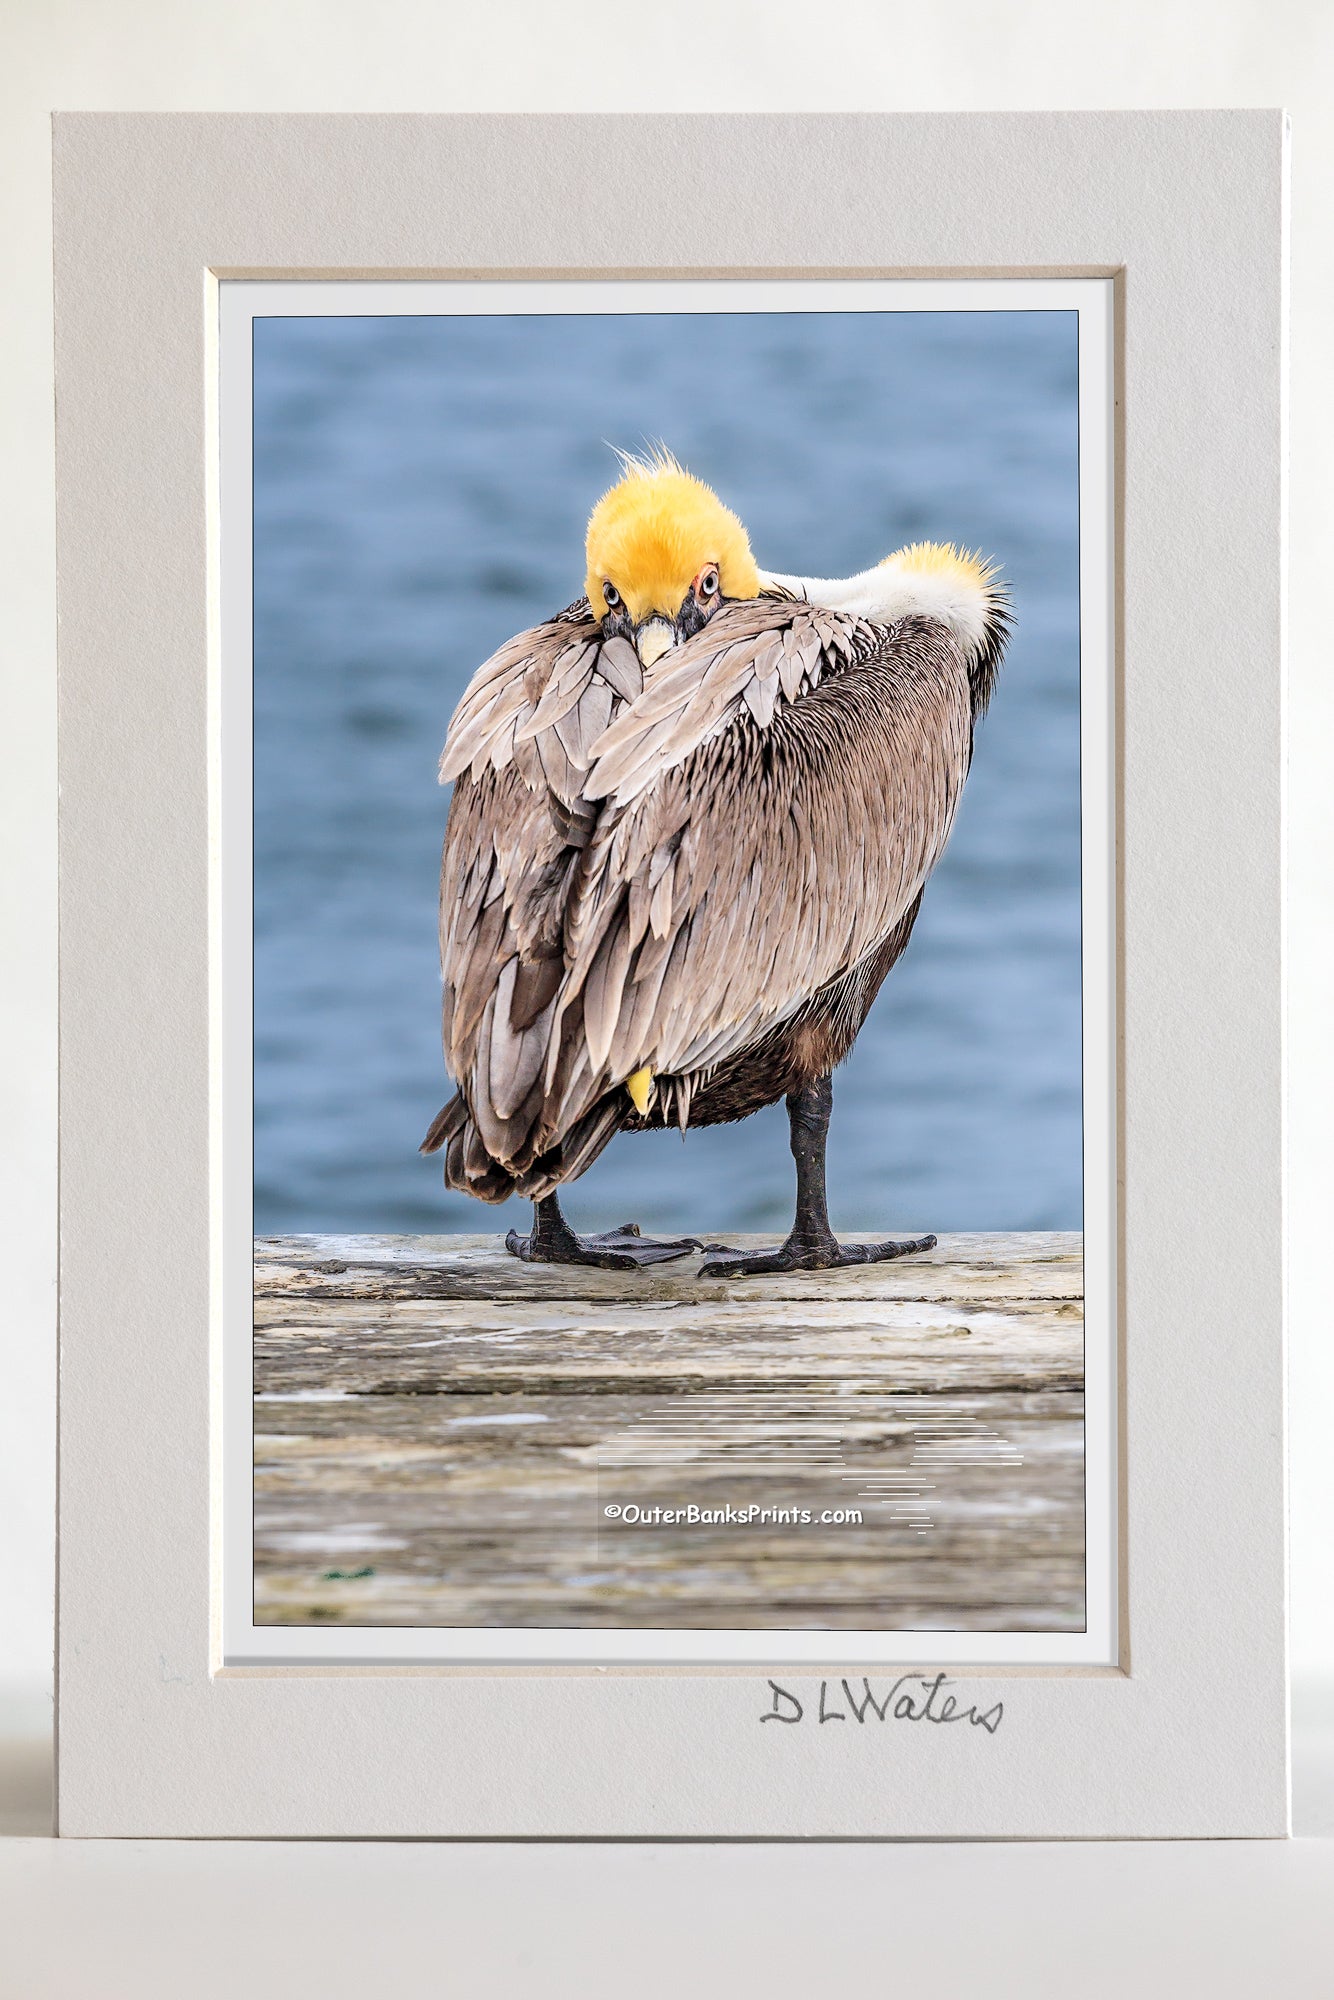 4 x 6 luster print in a 5 x 7 ivory mat of  A Brown pelican in its winter breeding plumage. In the summer their yellow head turns brown. Photographed on Ocracoke Island North Carolina.